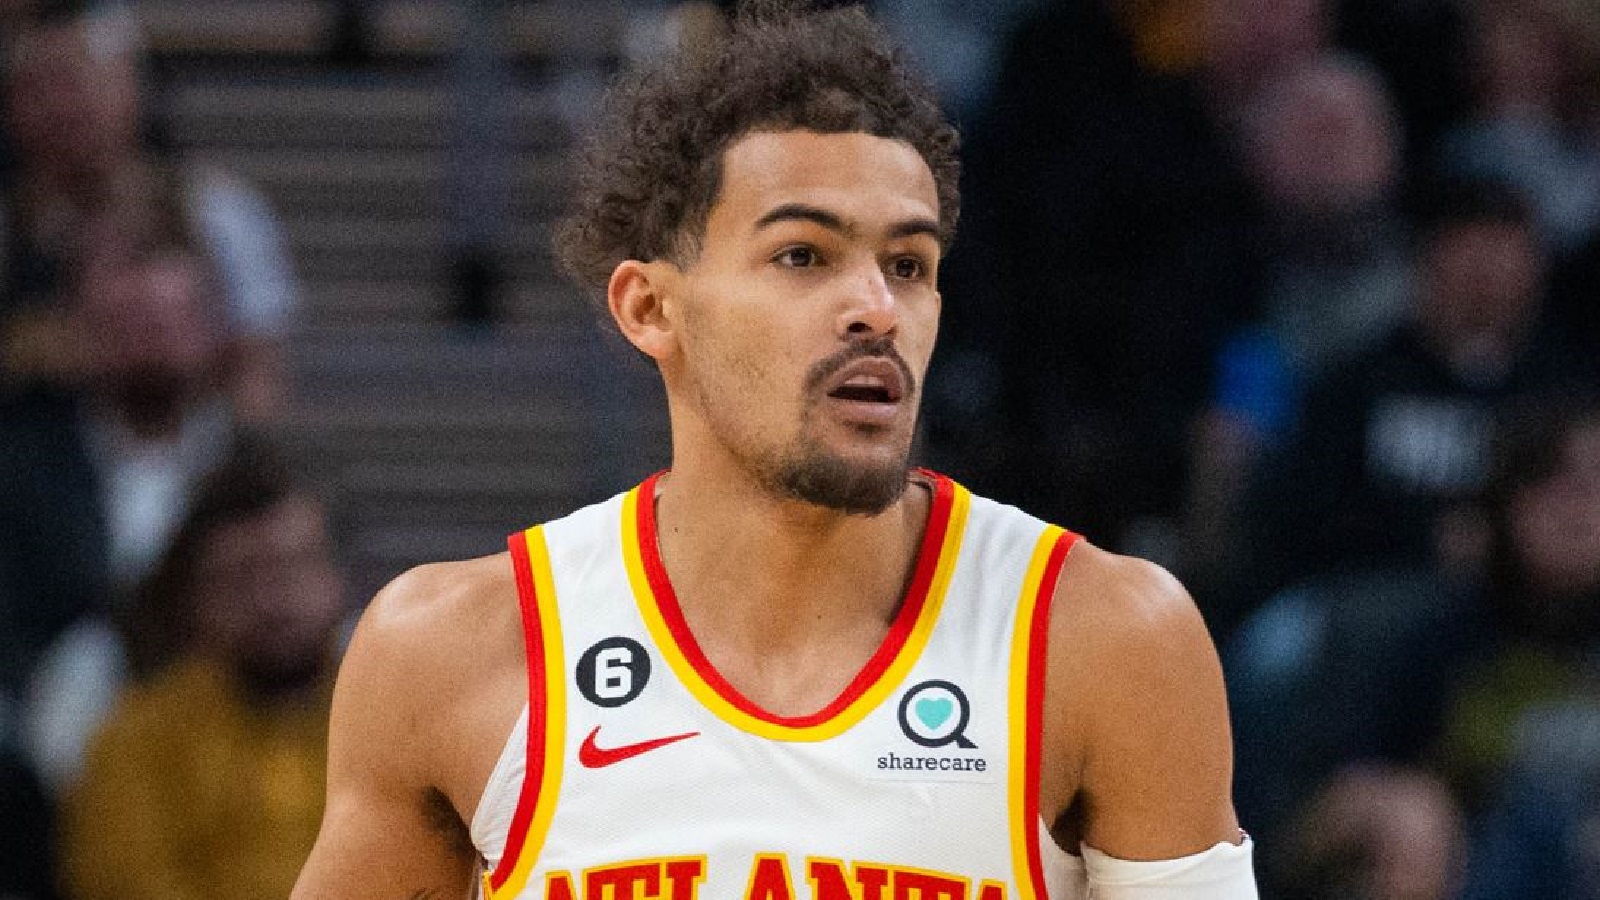 Will Trae Young Leave the Hawks? Inside Look at Star's Injury and Trade Buzz